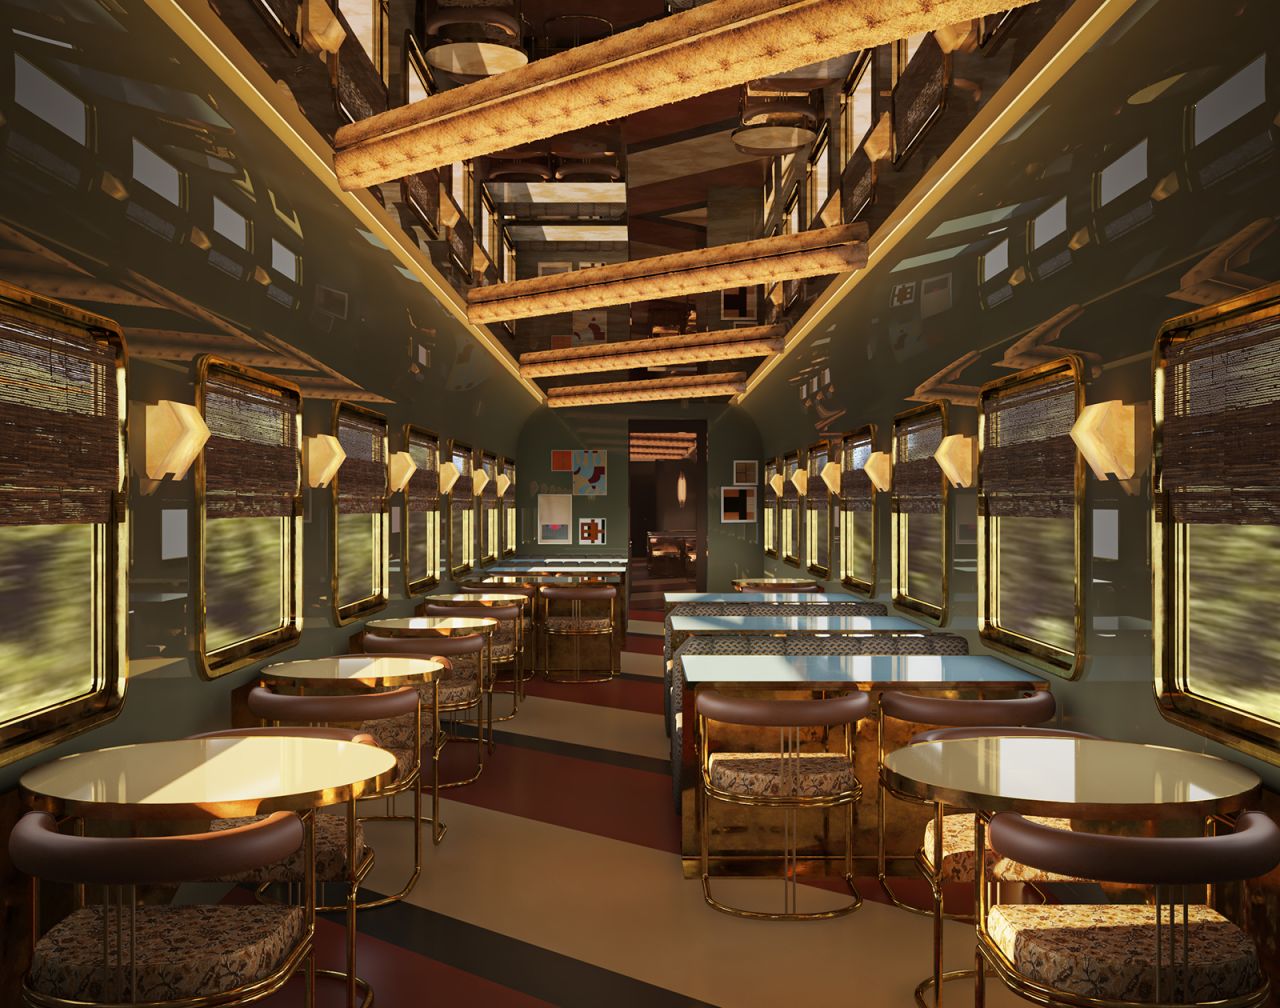 A  rendering of the new Orient Express La Dolce Vita, which will debut in 2023.